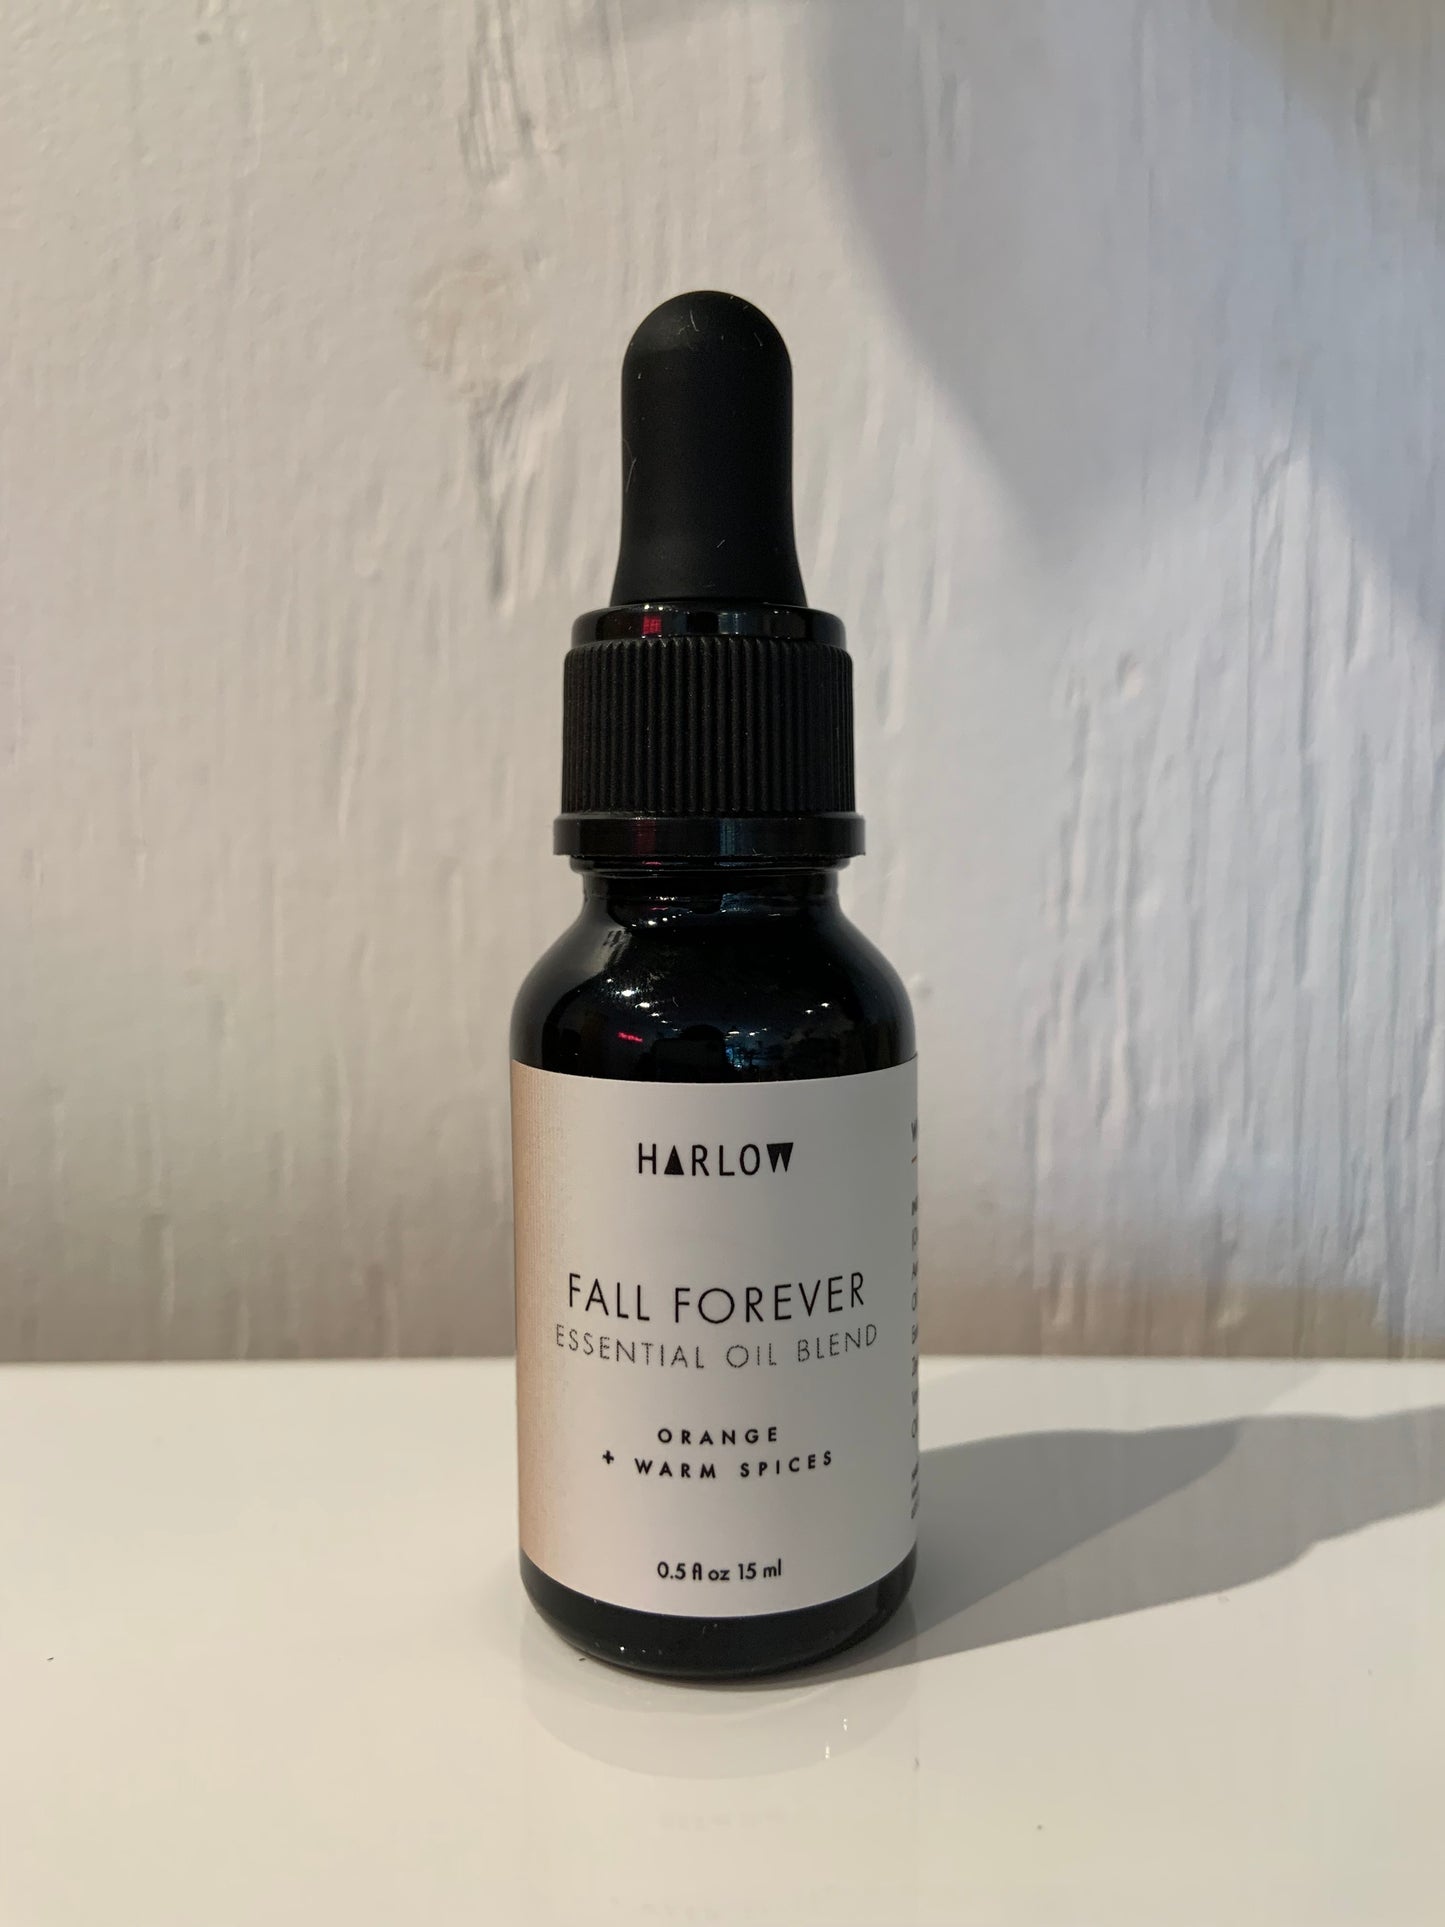 Harlow Skin Co.- Fall Forever Essential Oil Blend